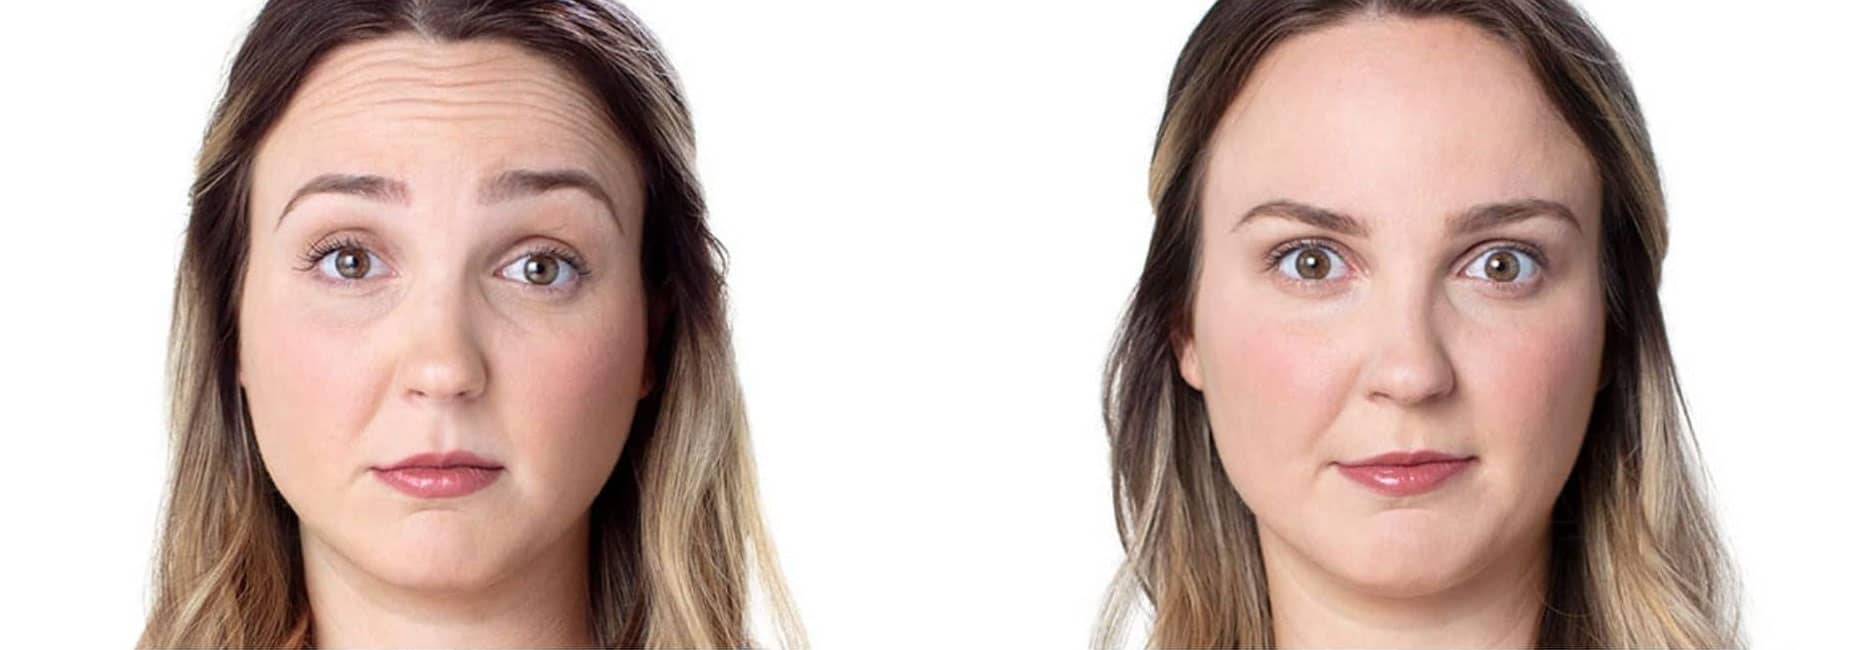 Botox before and after forehead lines